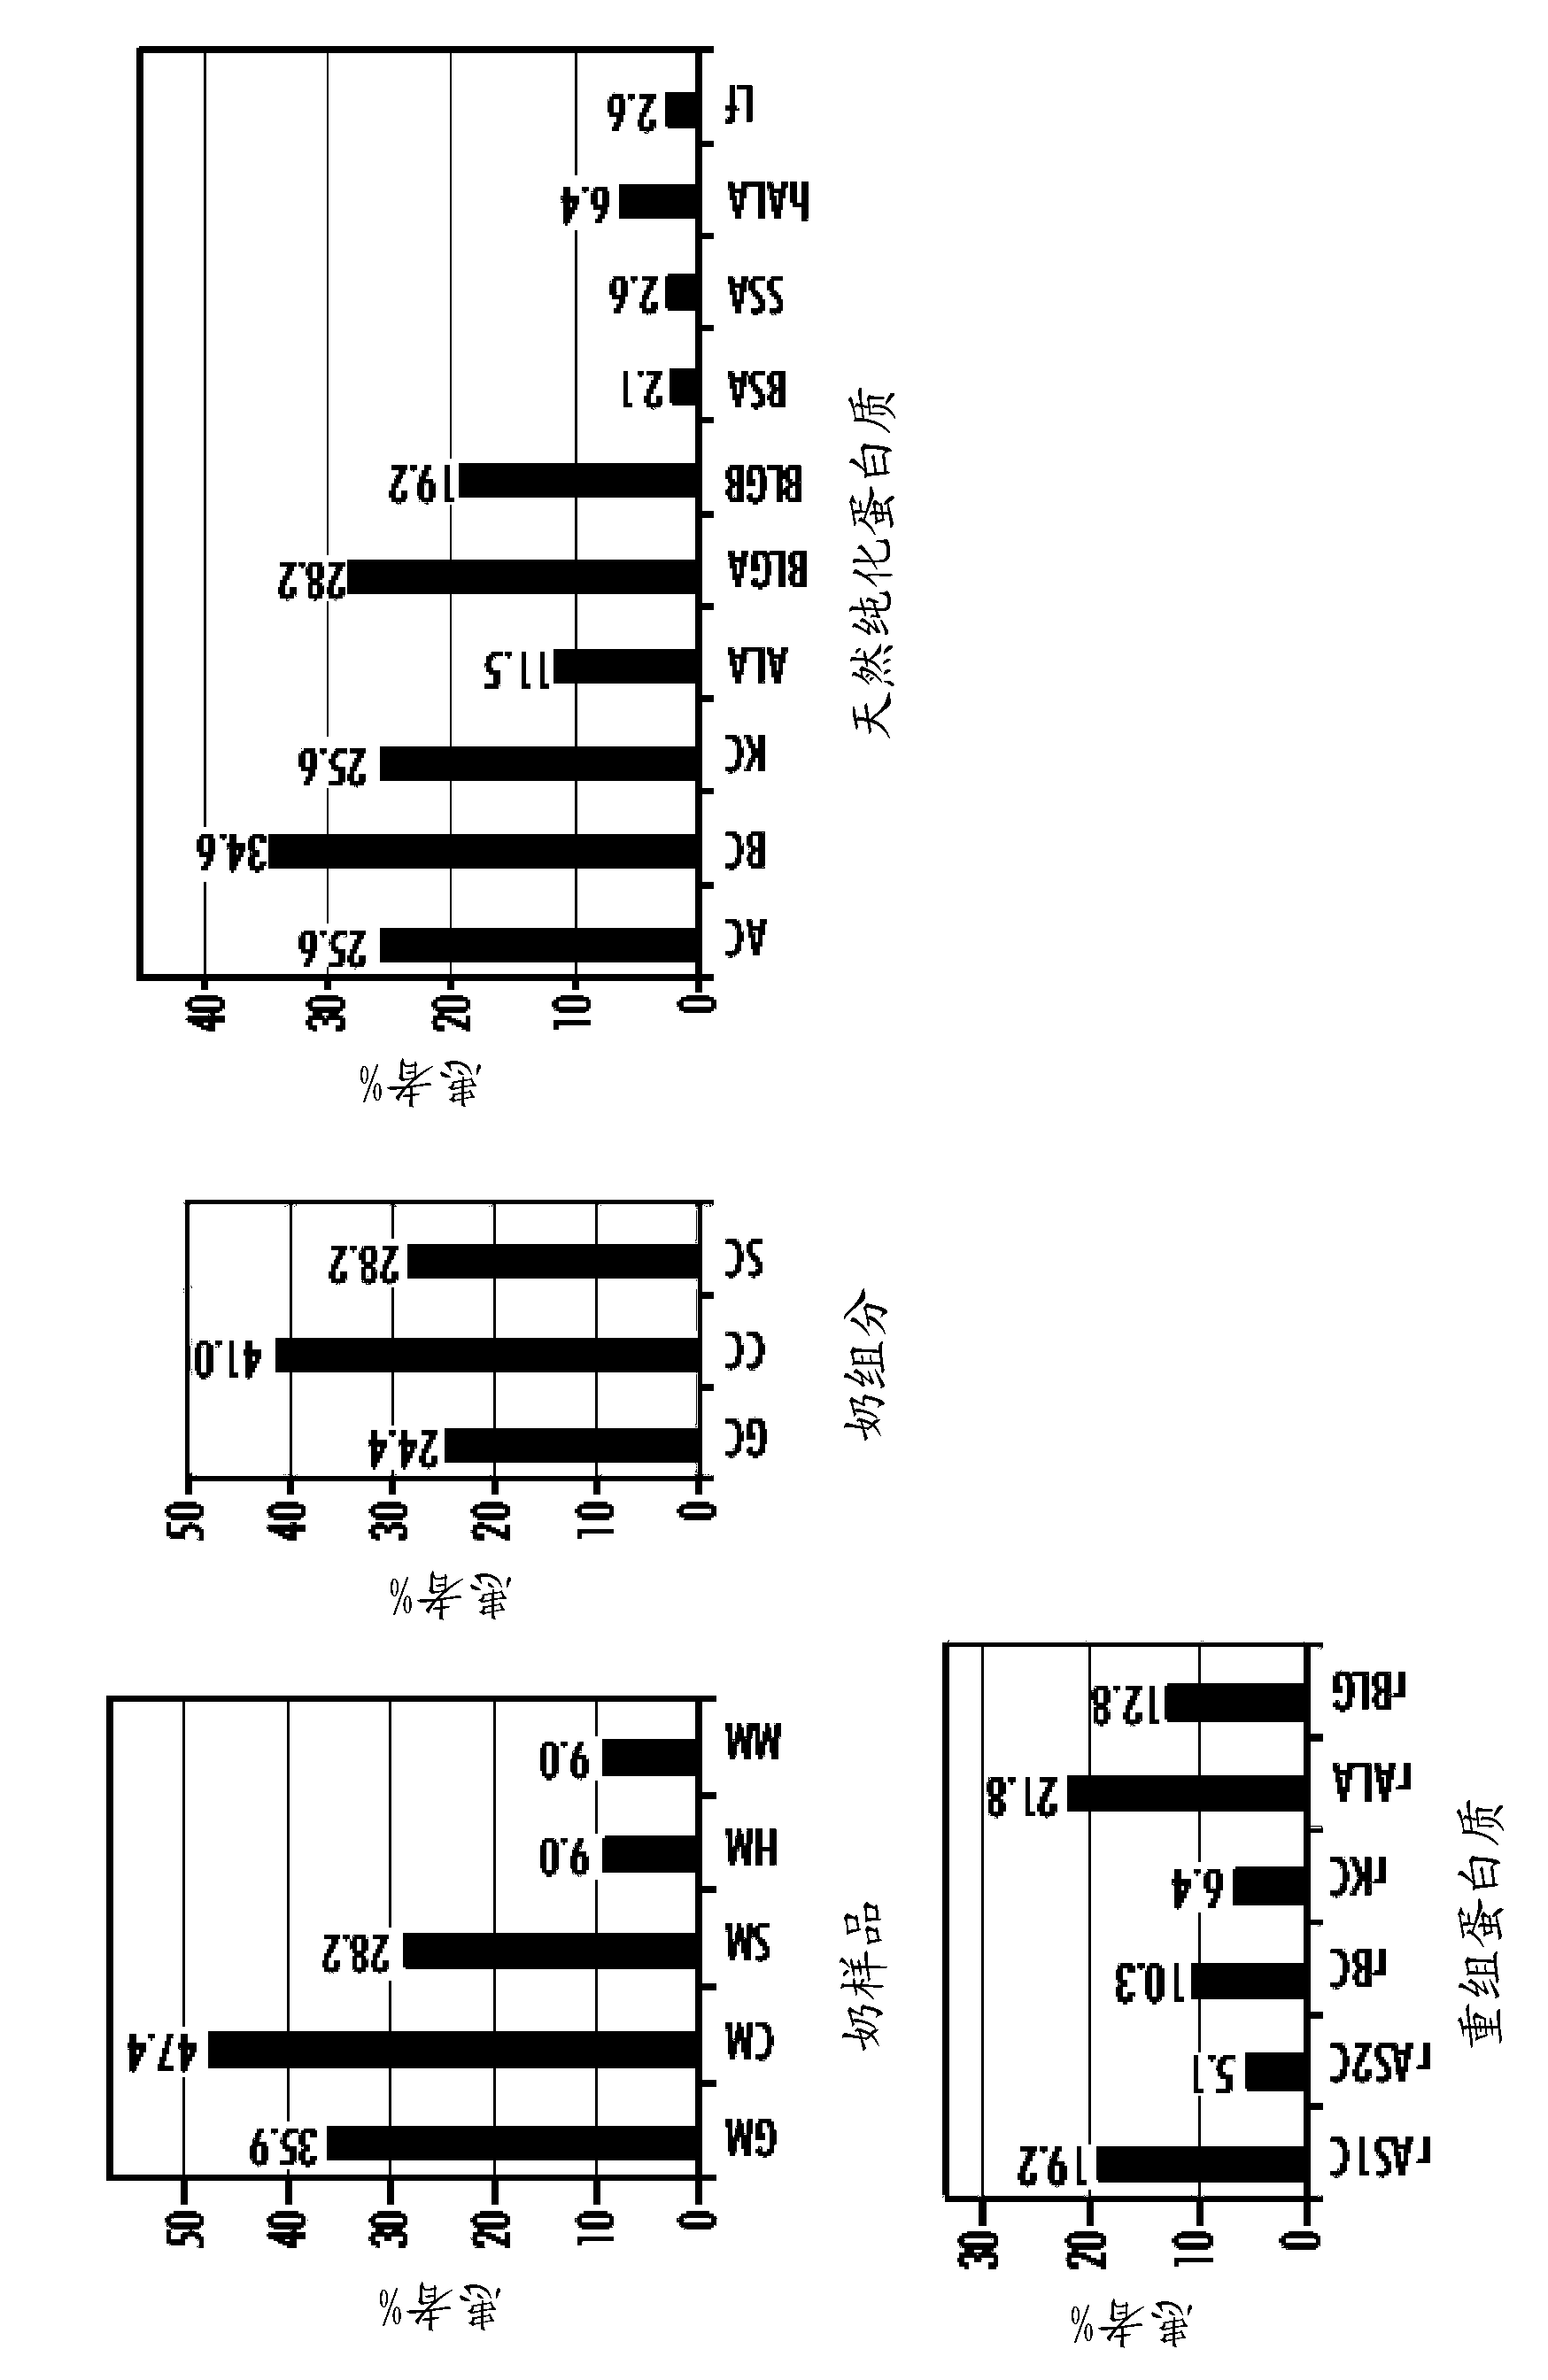 Method for identifying allergenic proteins and peptides